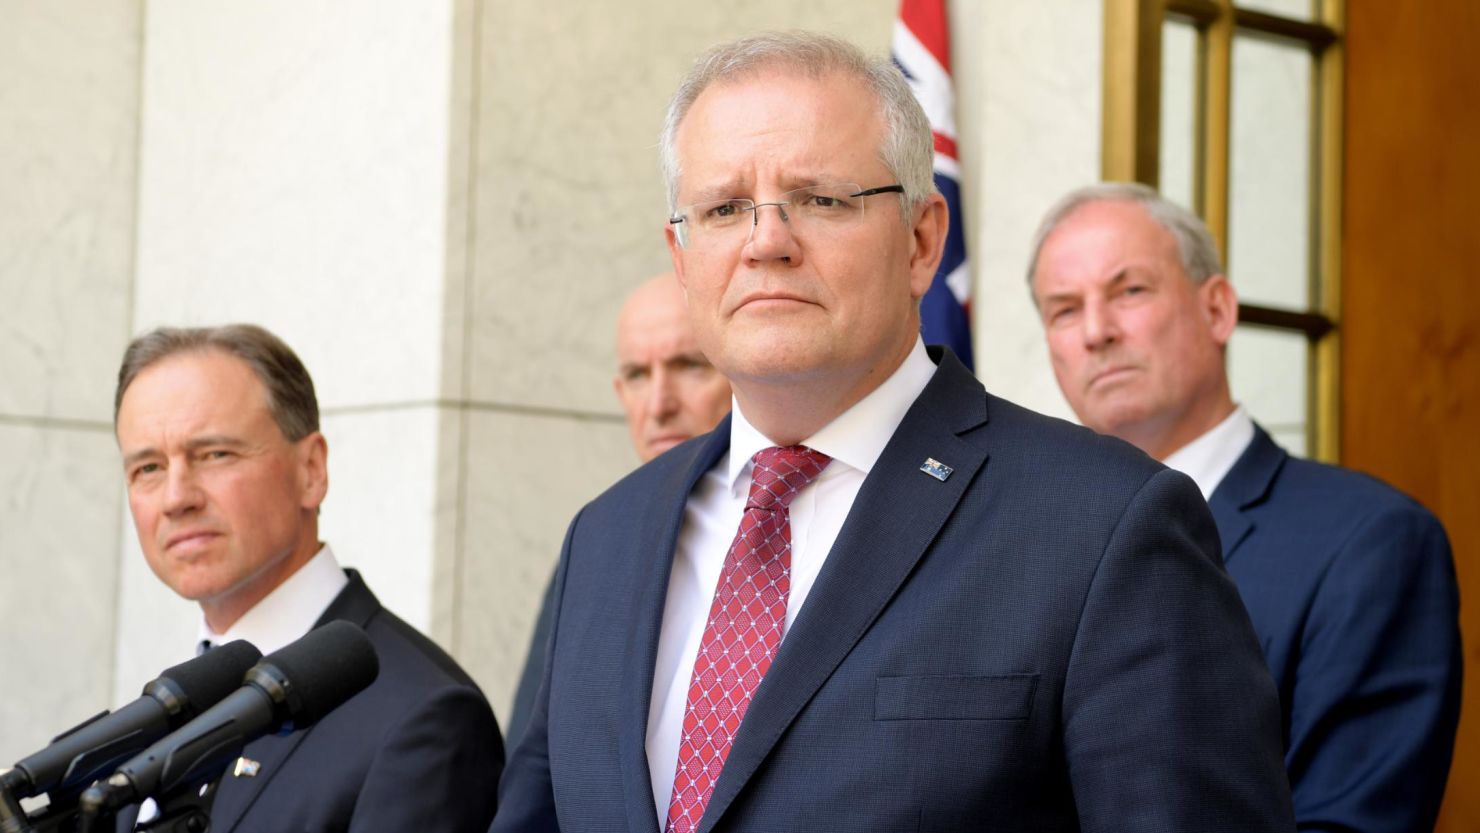 Prime Minister Scott Morrison (C) speak to media during a press conference at Parliament House on November 25 in Canberra, Australia.